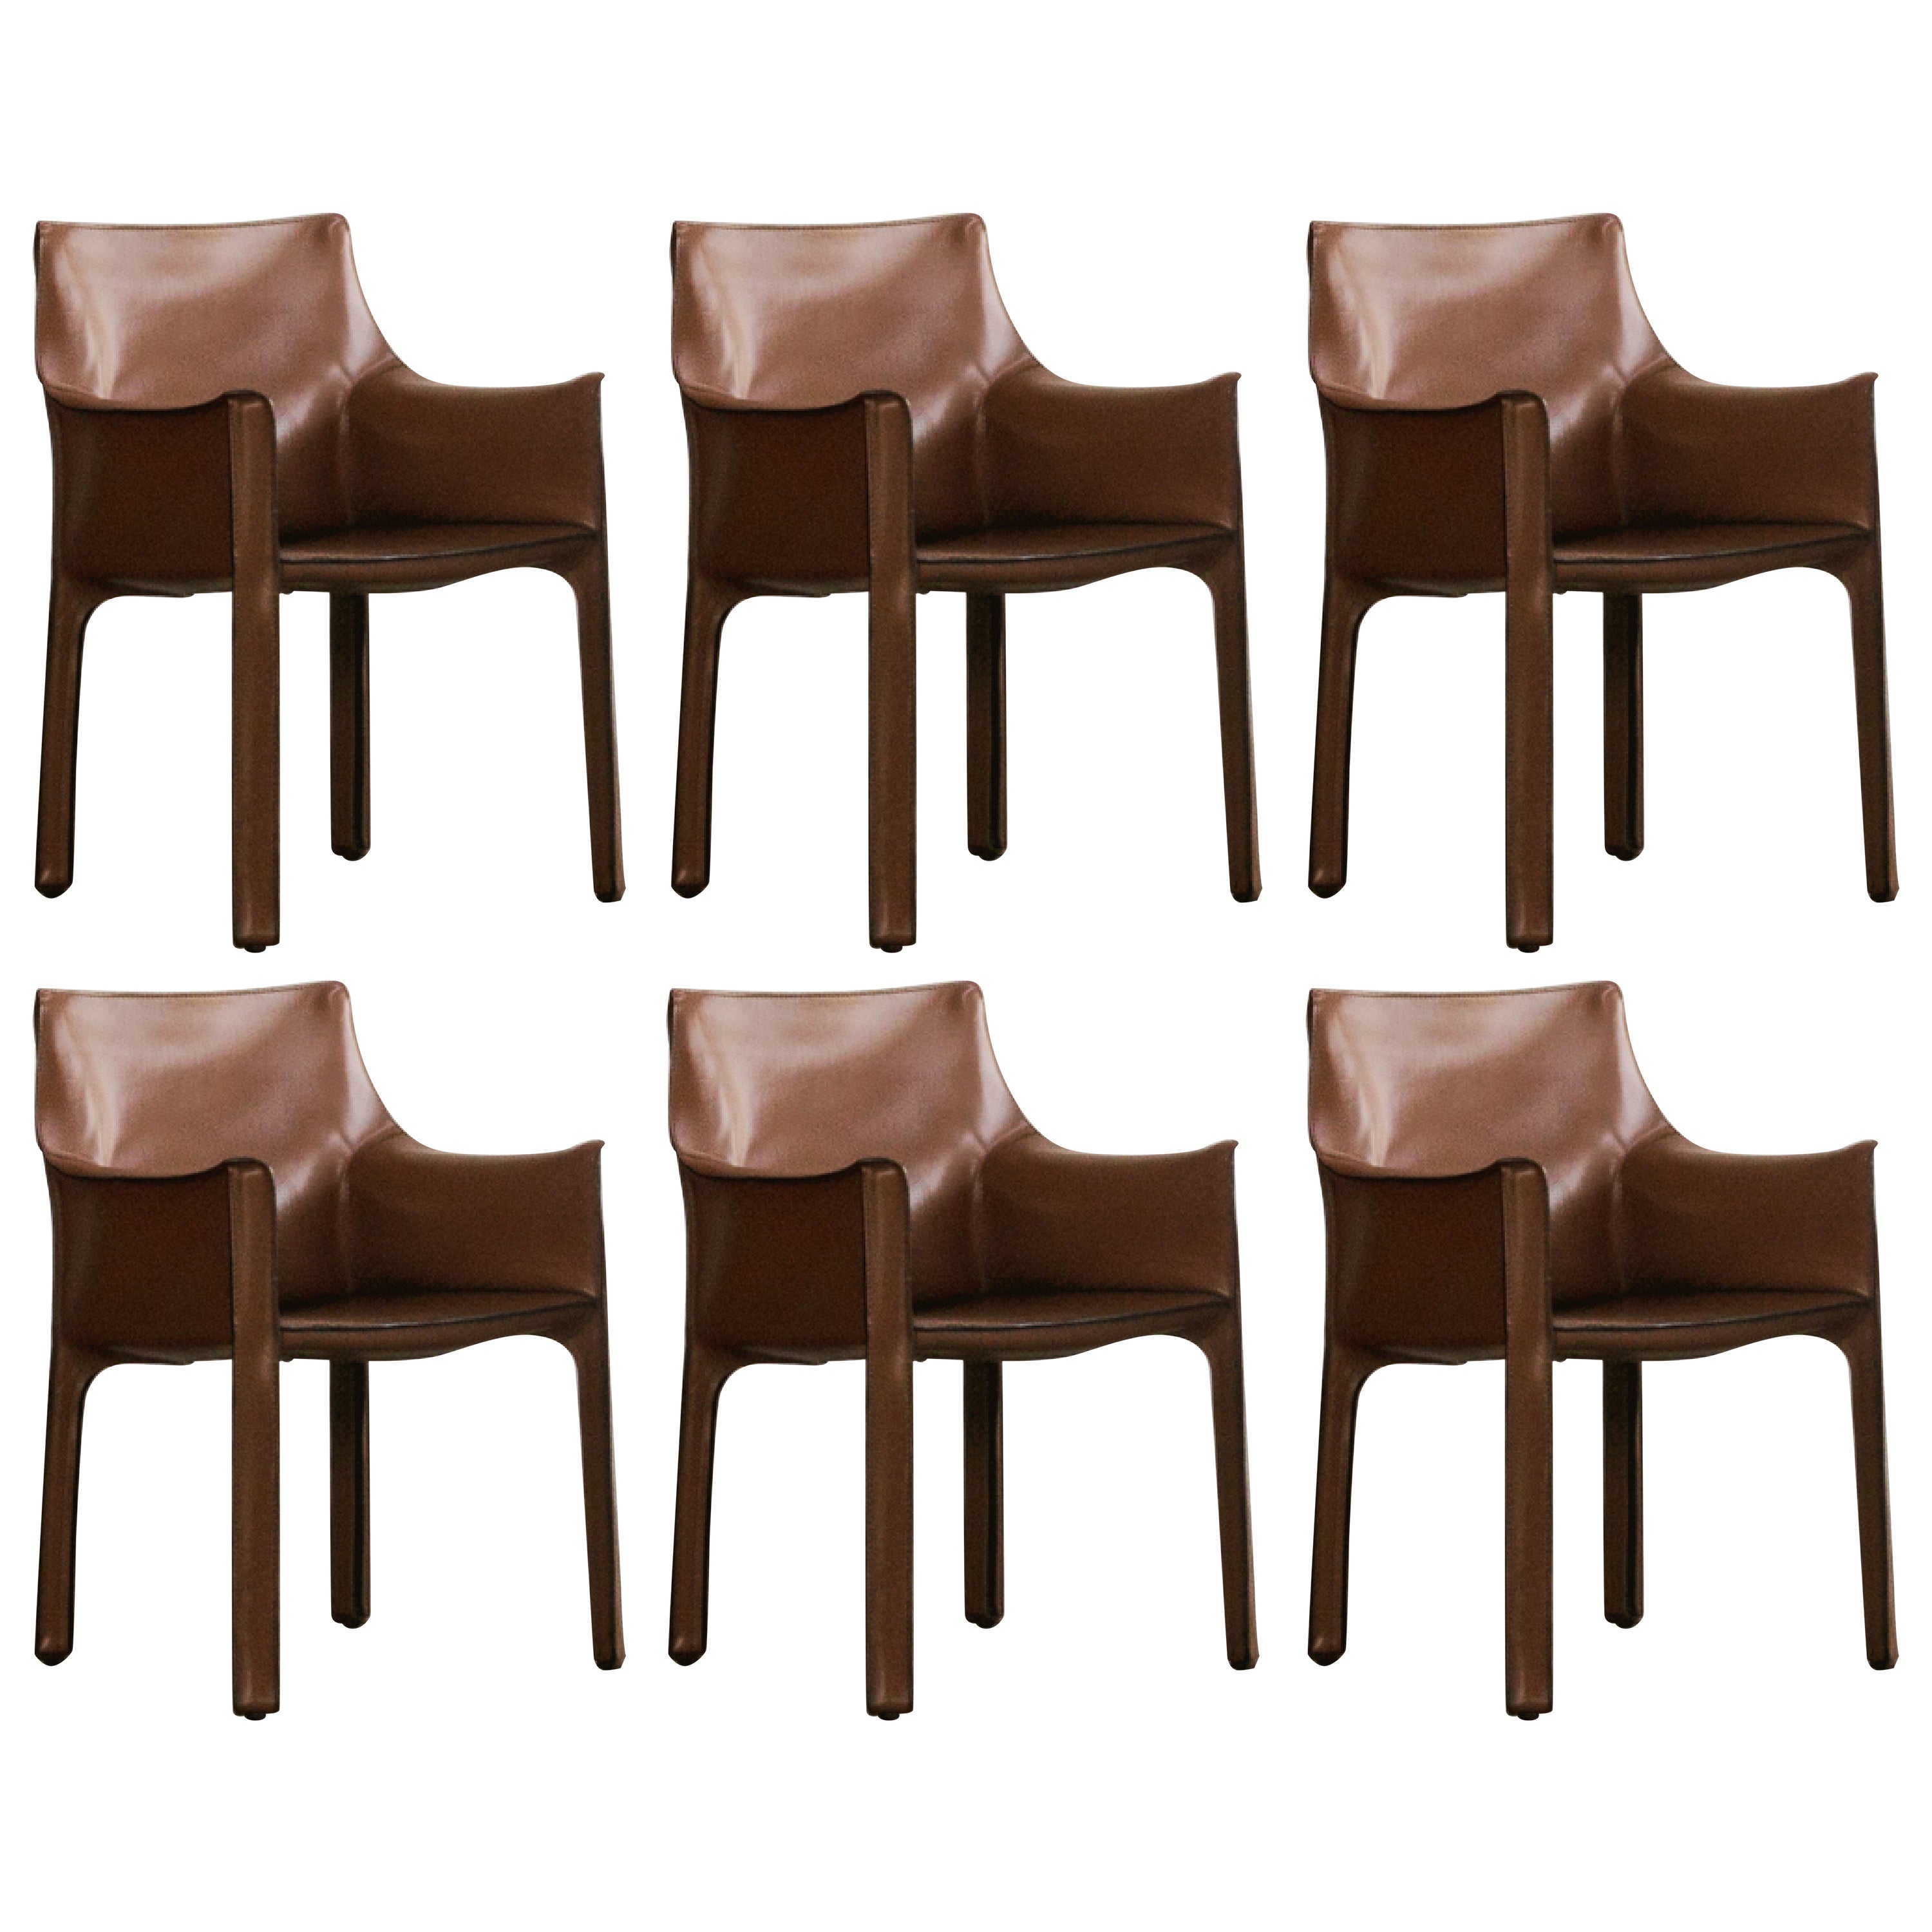 Mario Bellini "CAB 413" Chairs for Cassina in Light Brown, 1977, Set of 6 For Sale